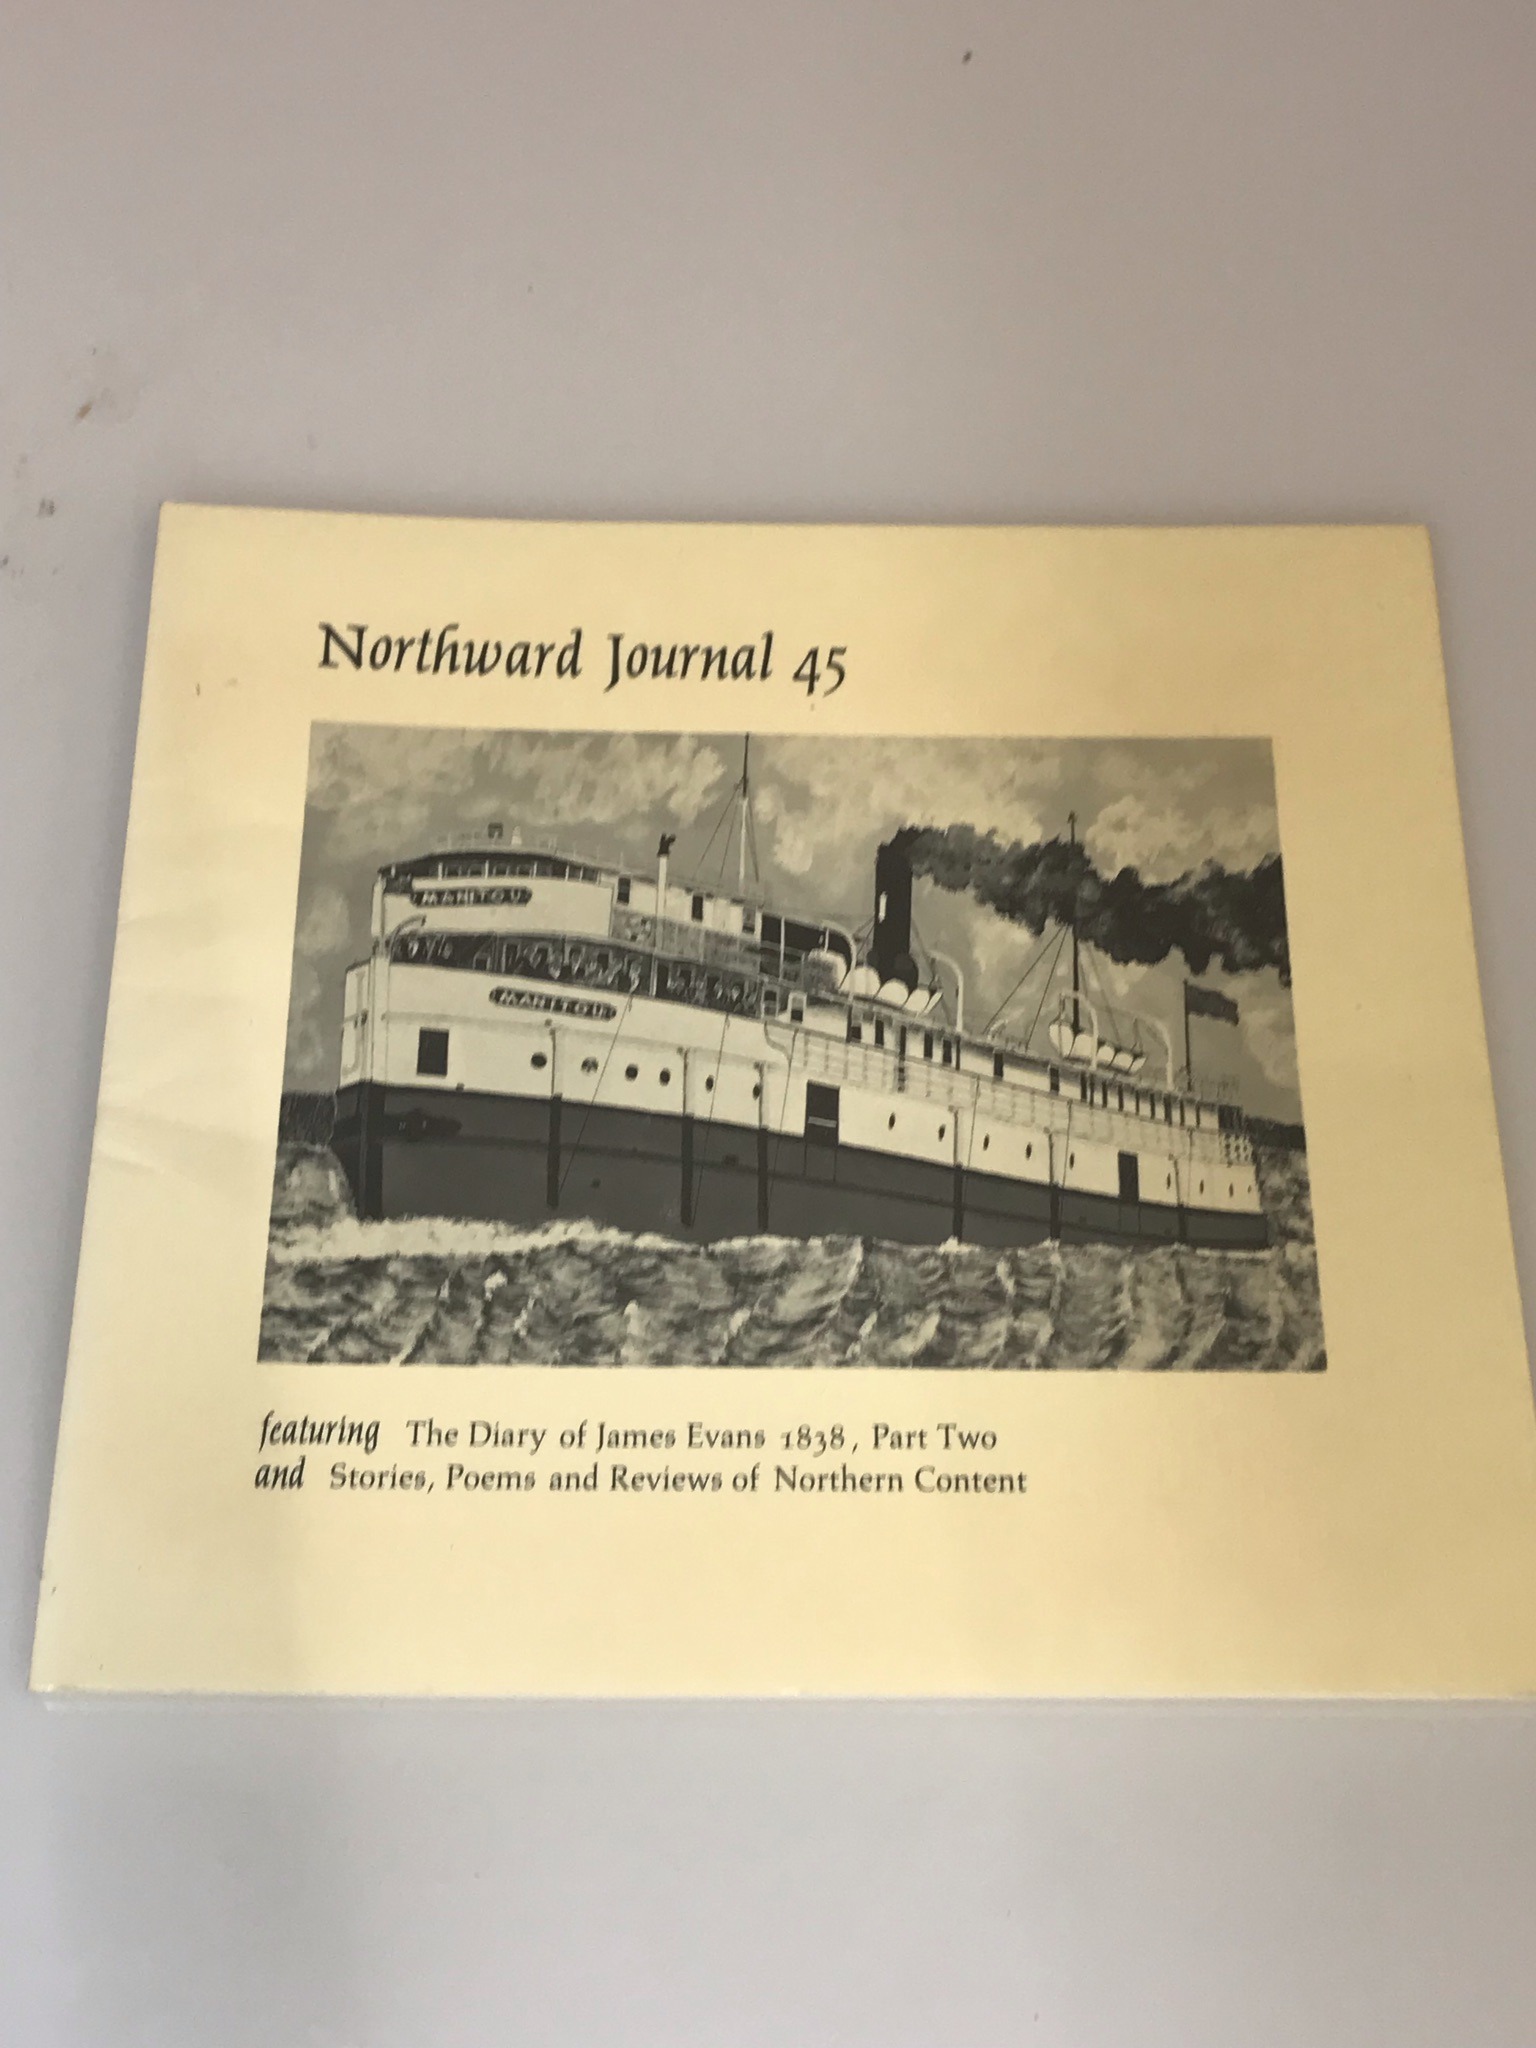 Northward Journal 45, Featuring The Diary of James Evans 1838, Part Two ...